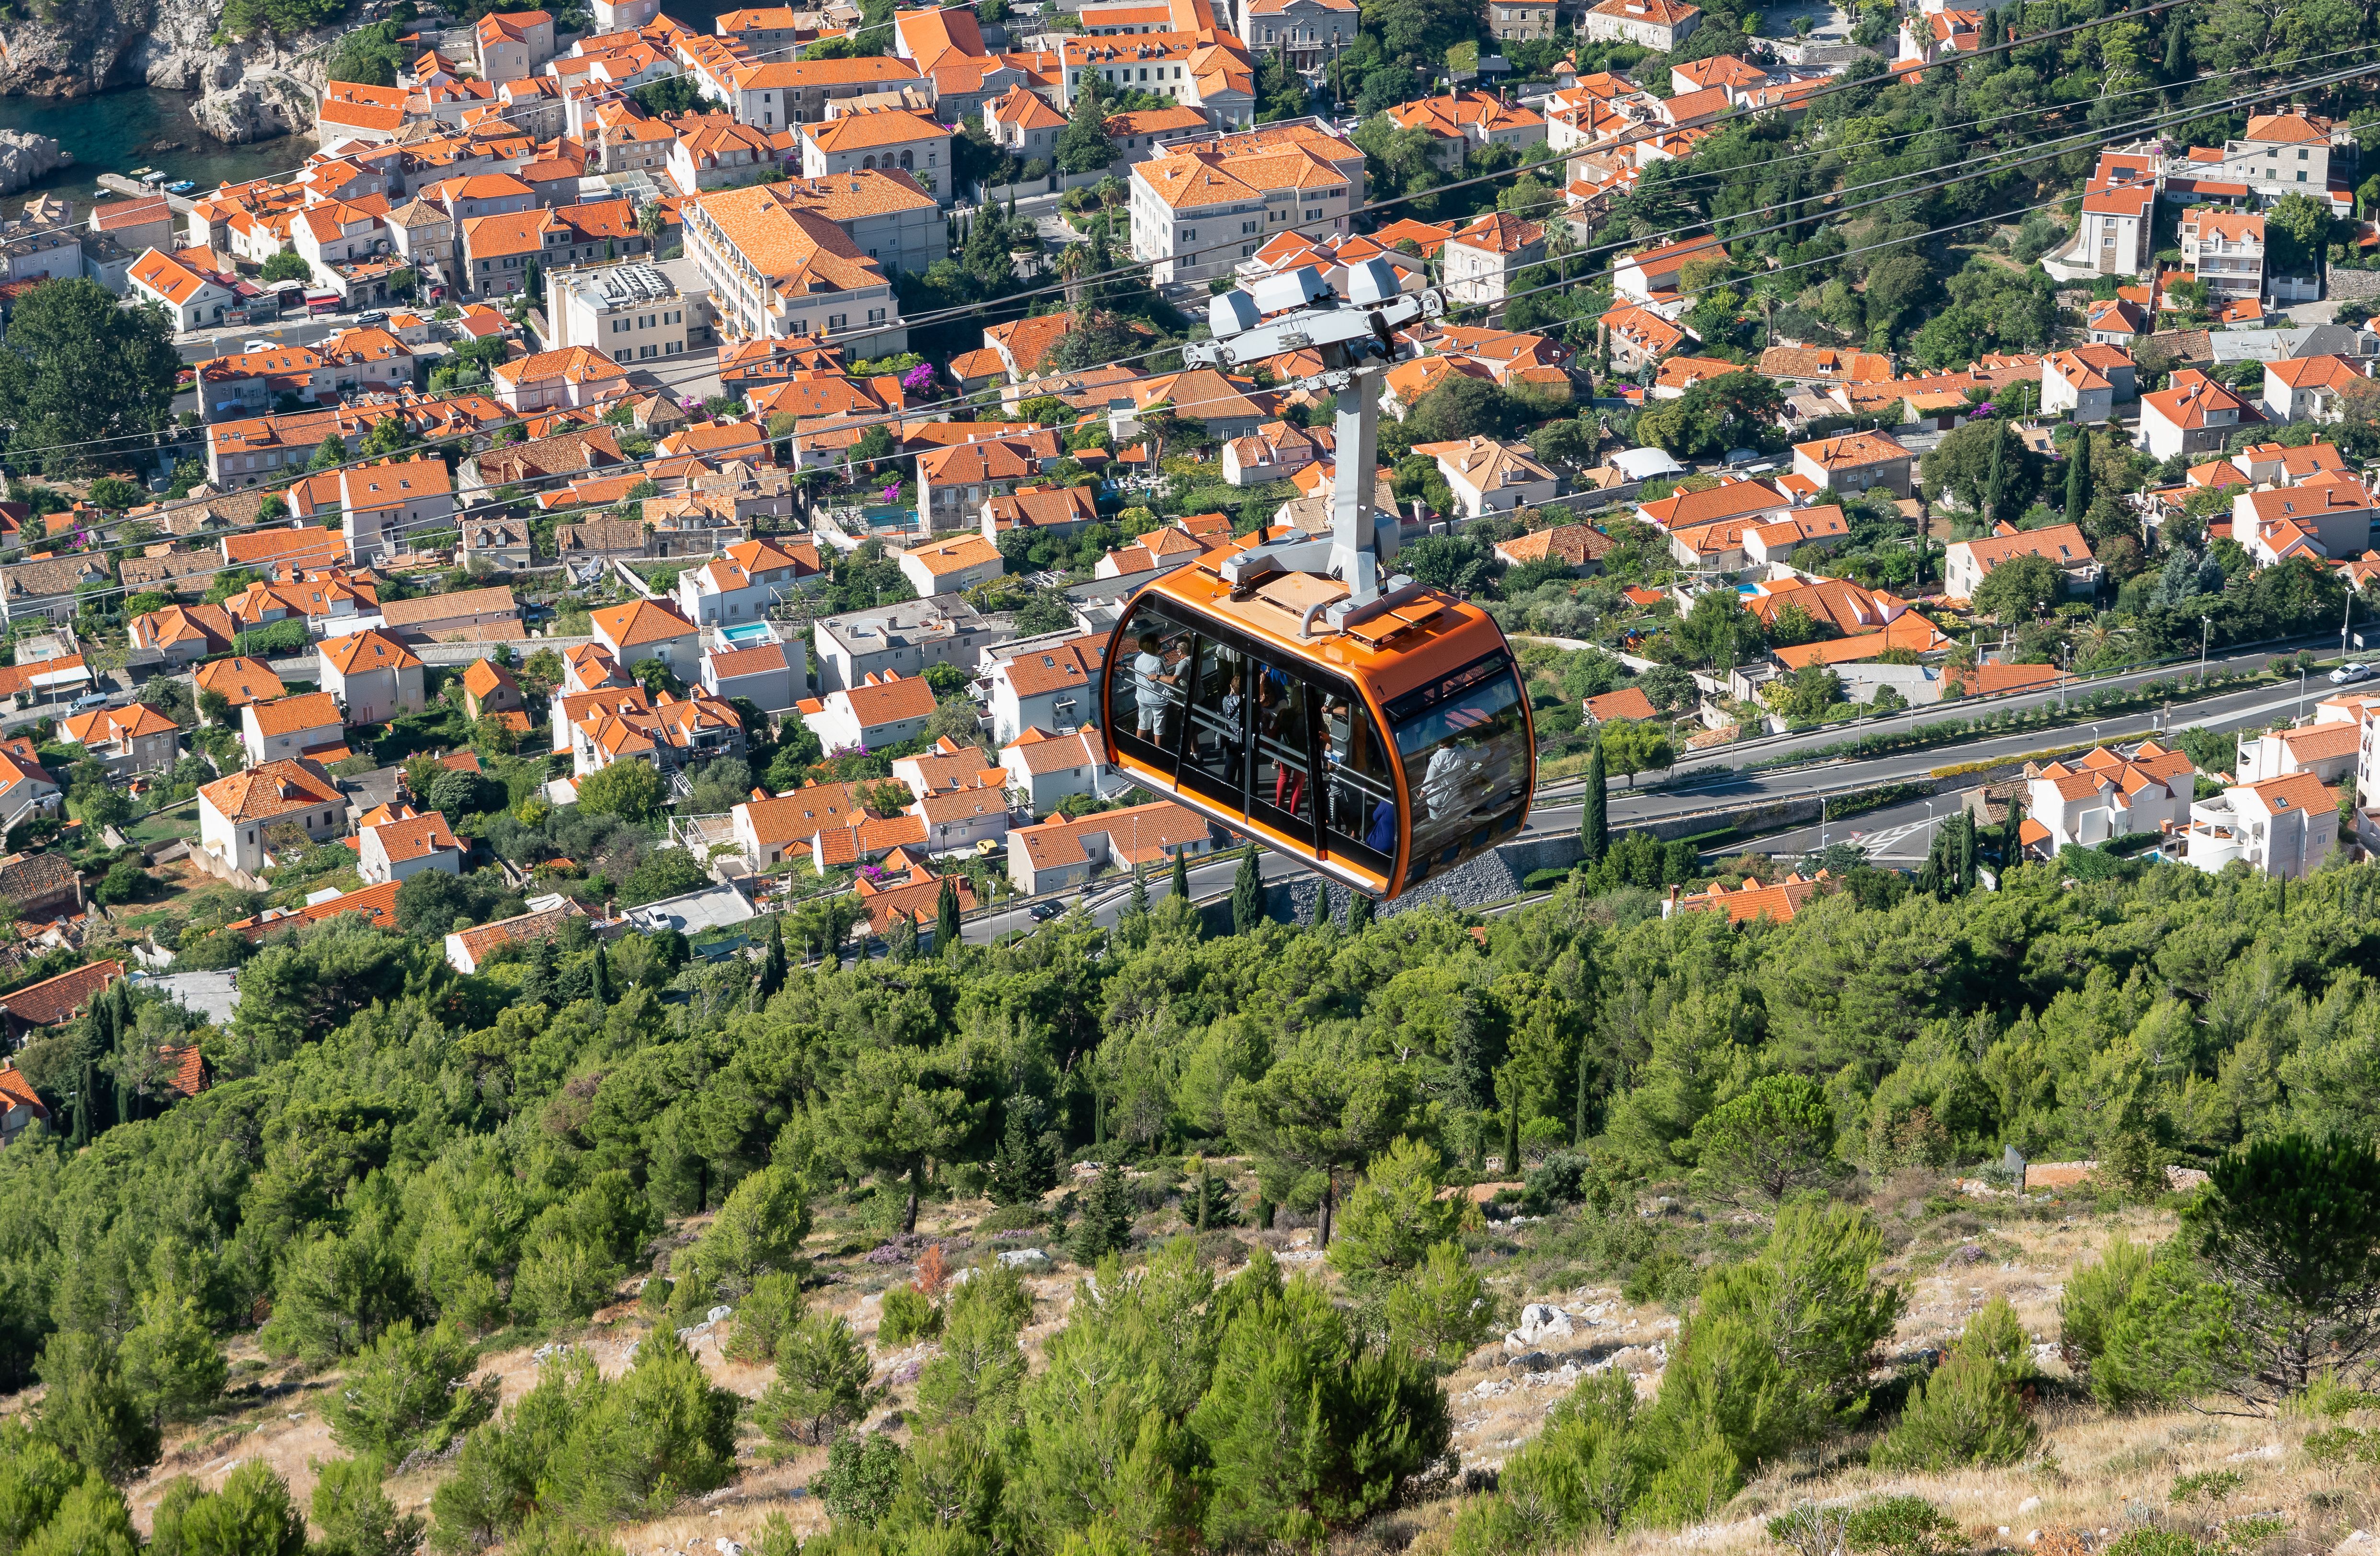 Aerial view of the Old Town and a cable car from Mount Srd in Dubrovnik, Croatia